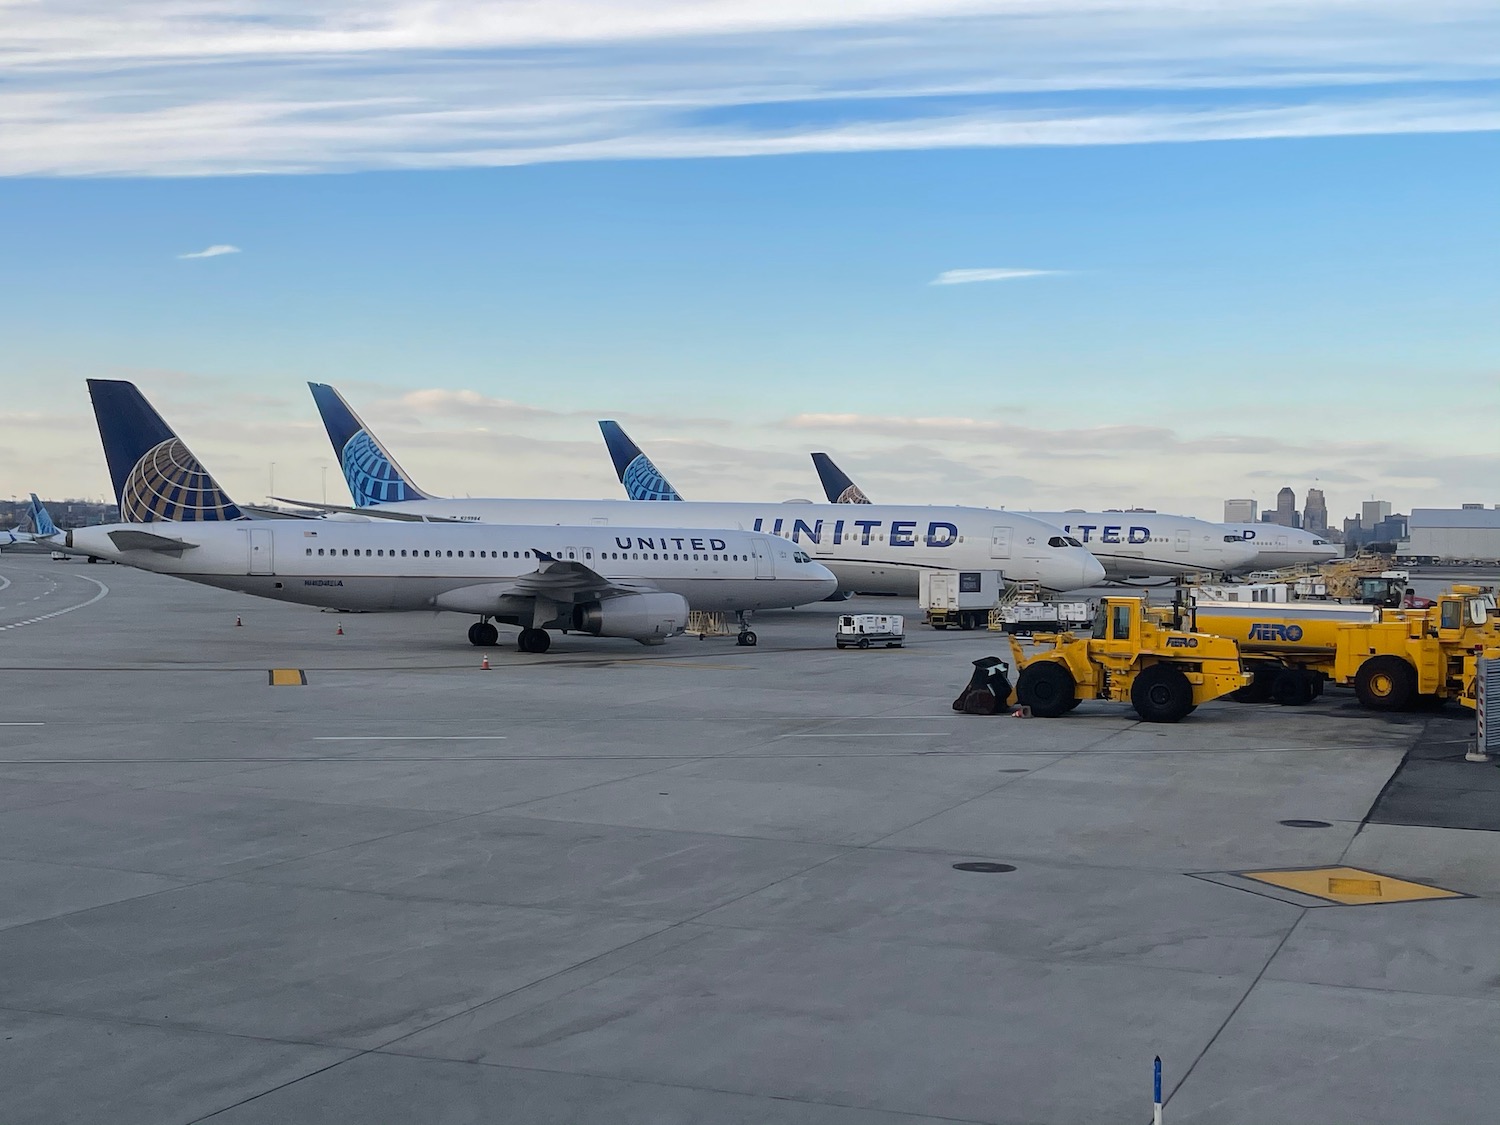 airplanes parked on a tarmac